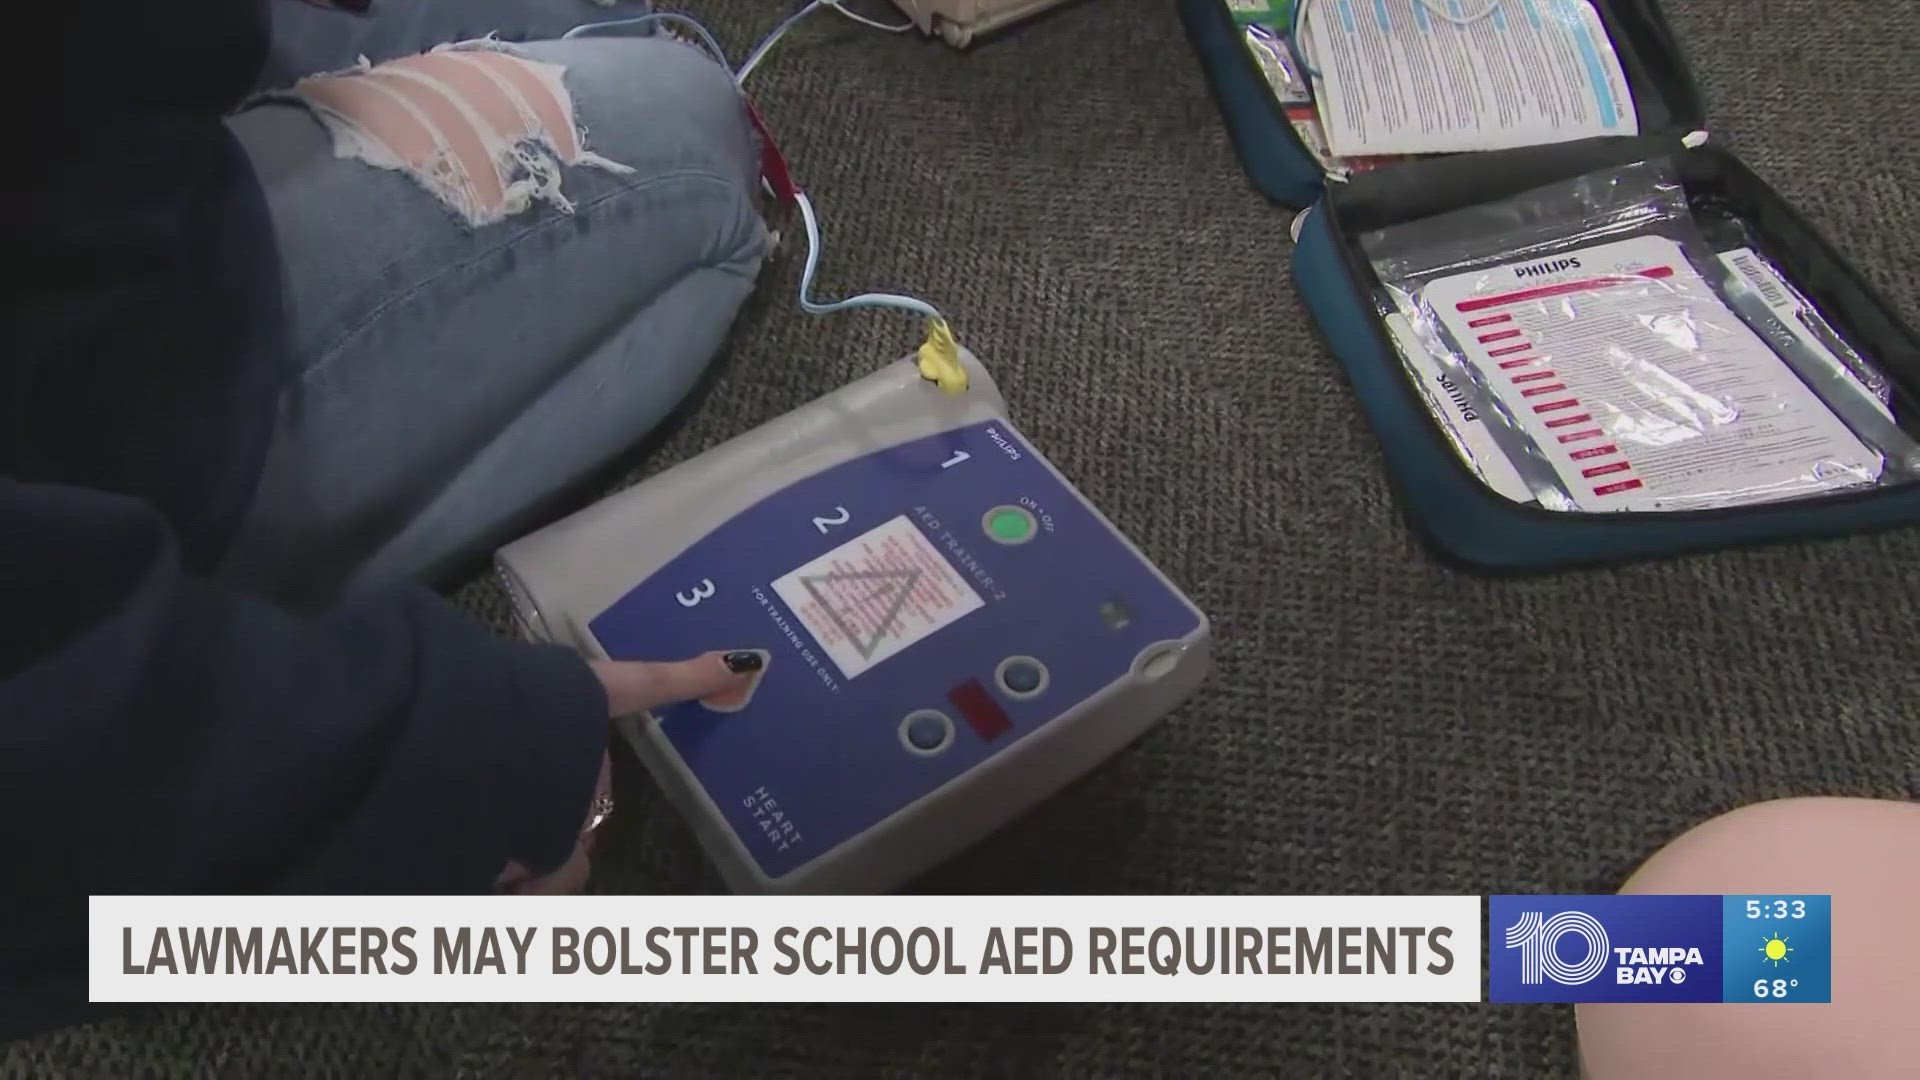 All public schools would be required to have at least one AED on school grounds.